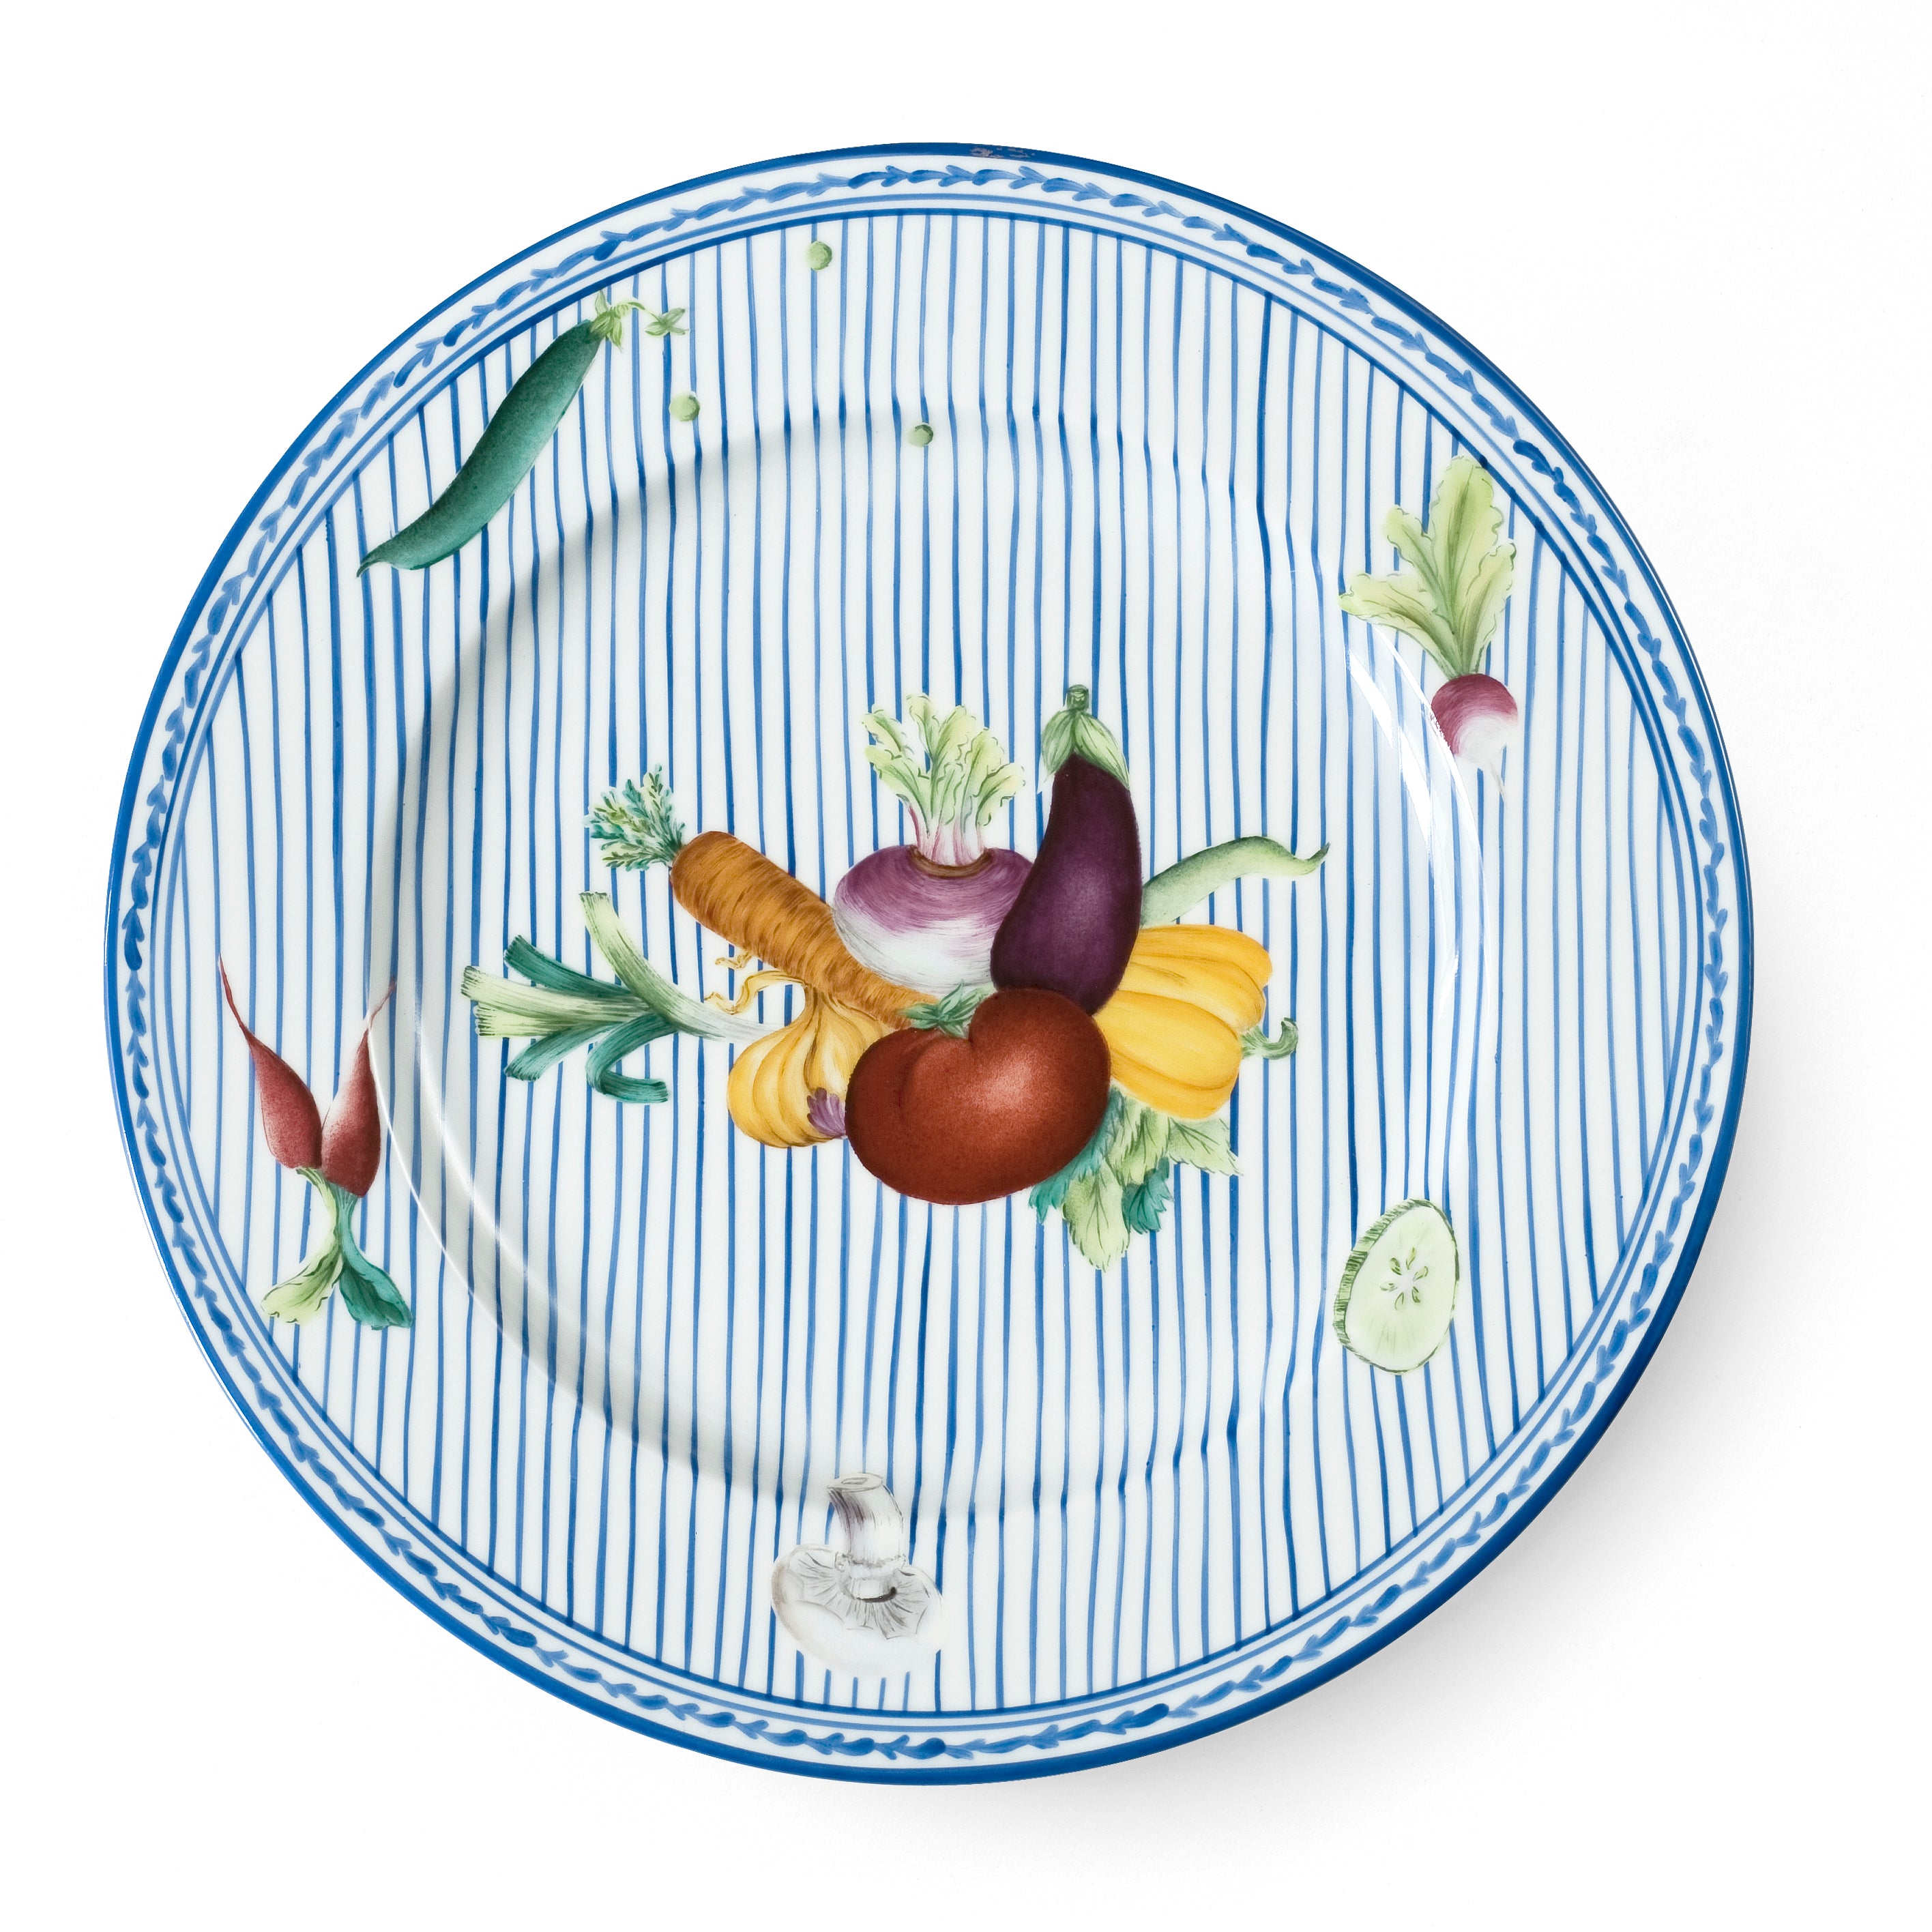 Potager in Blue - Dinner plate
